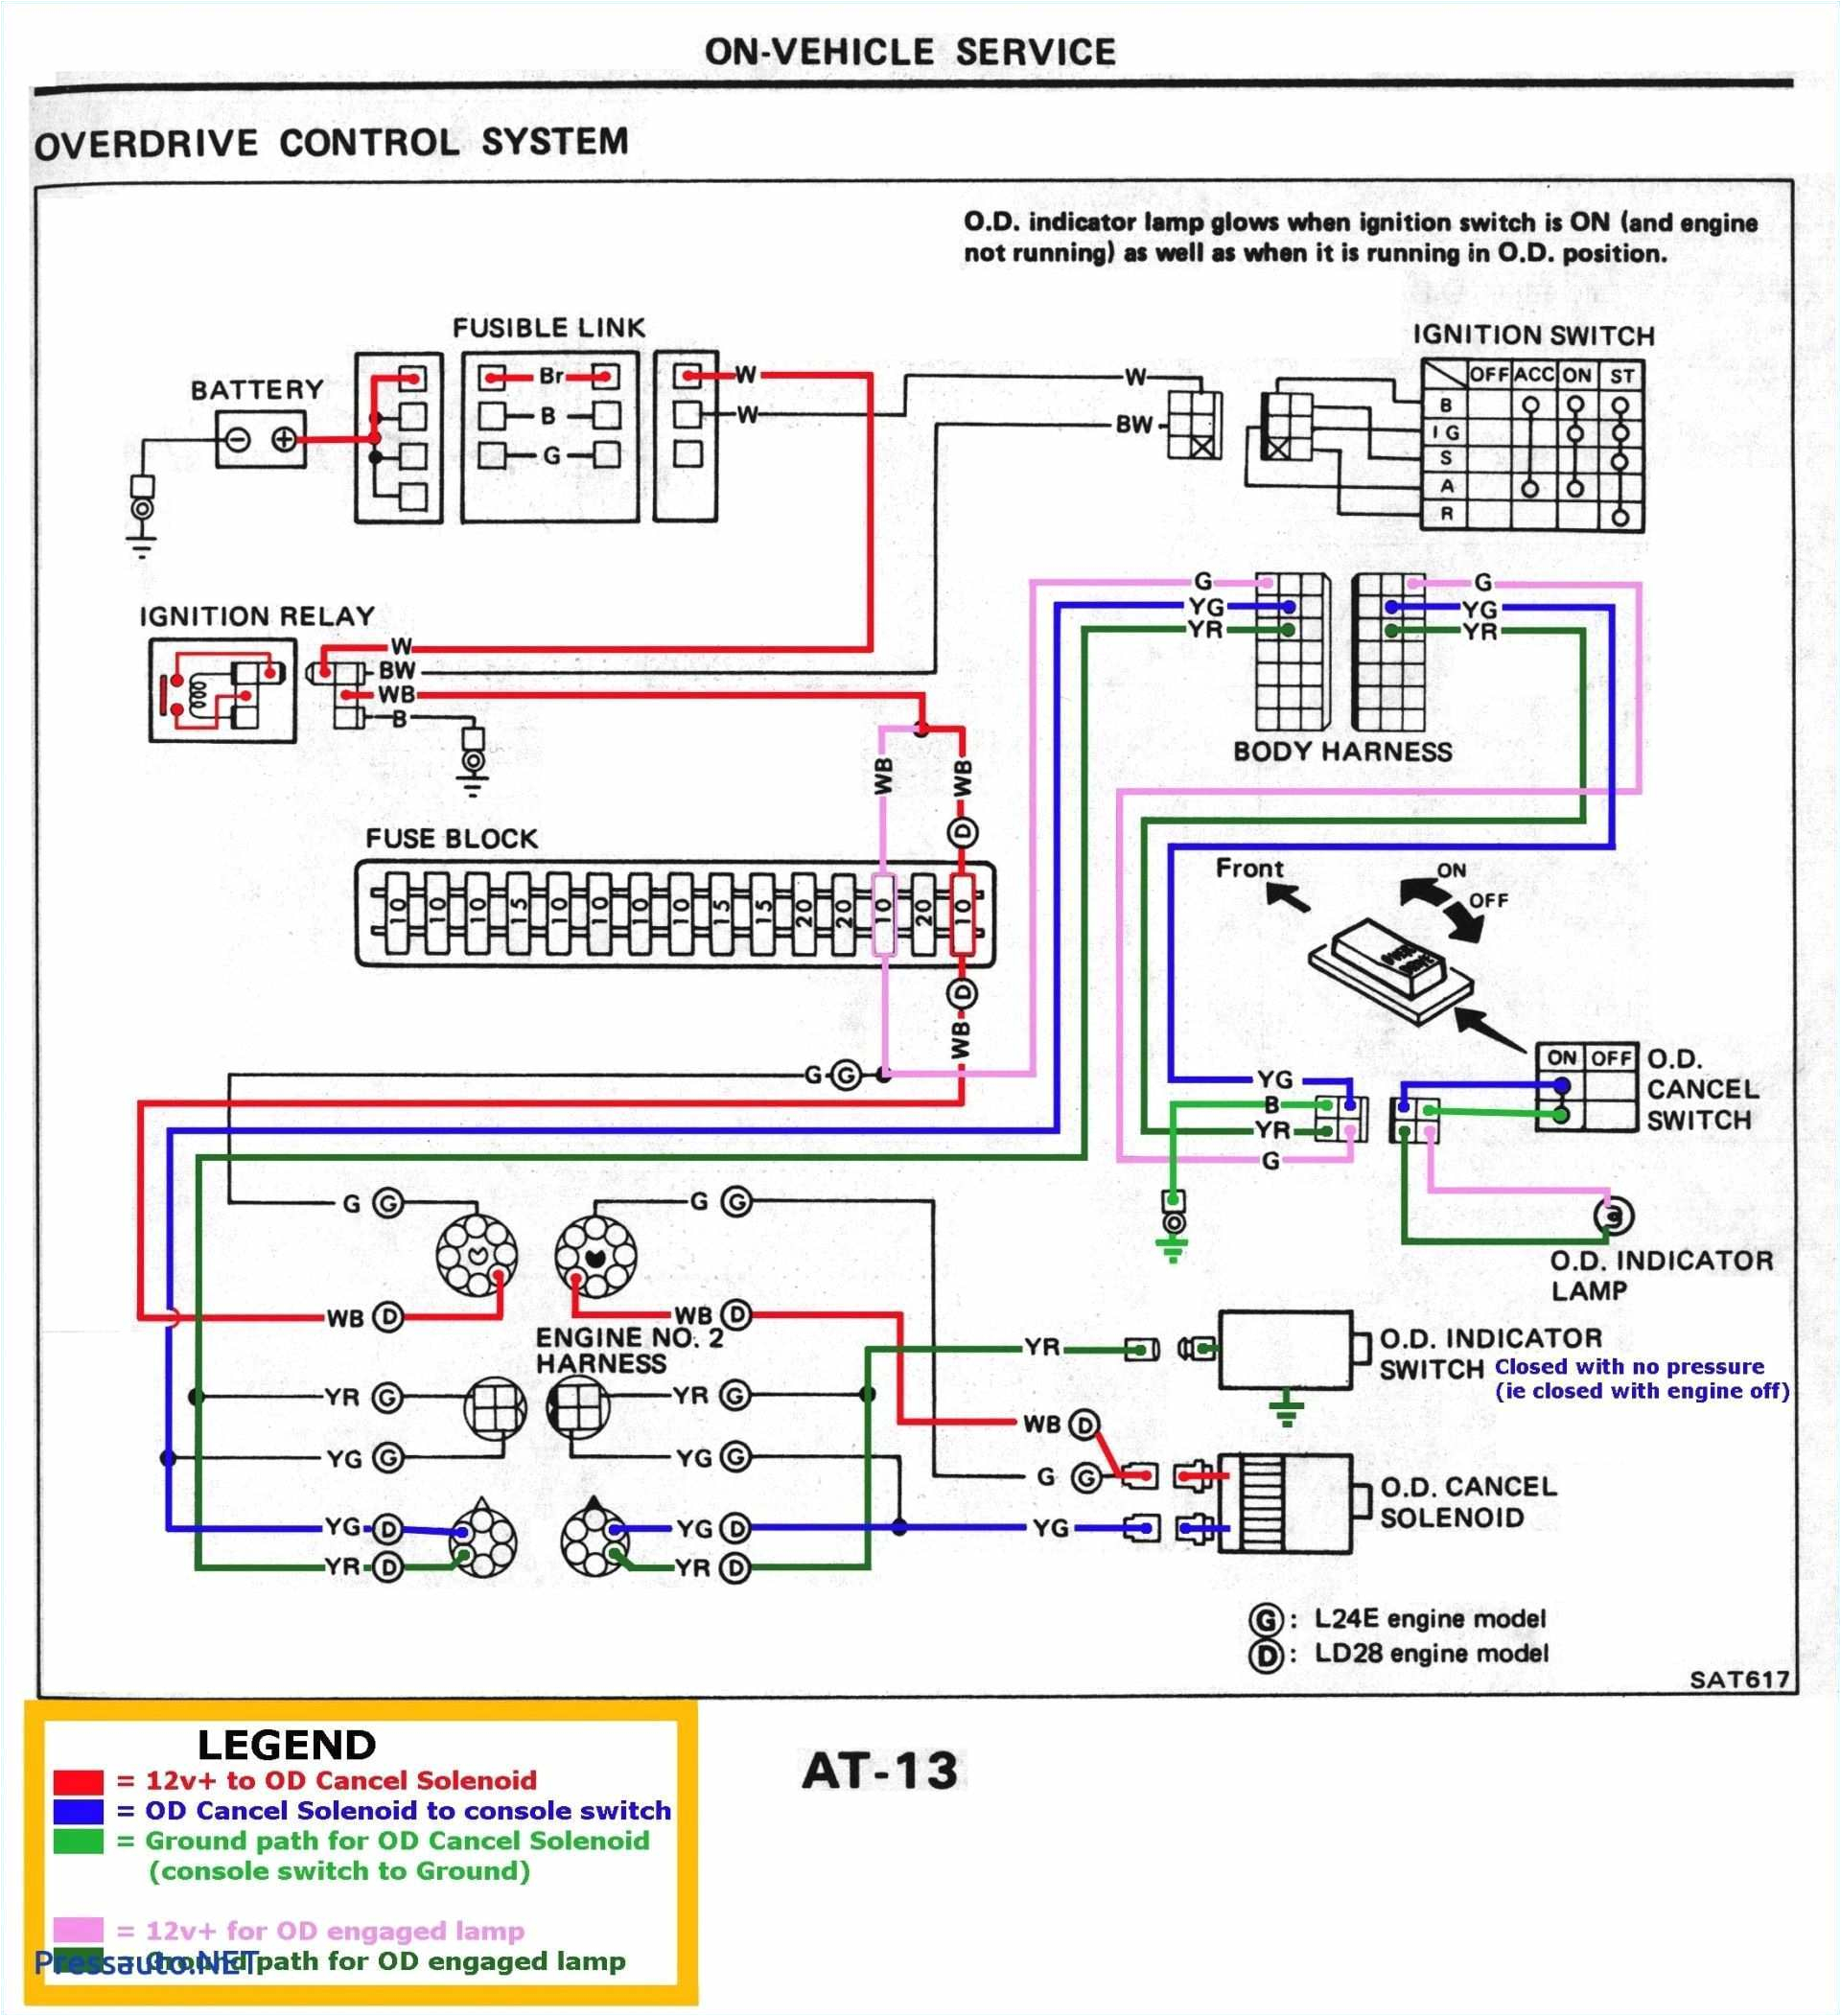 82206958 wiring harness diagram wiring diagrams dimensions 82206958 wiring harness diagram